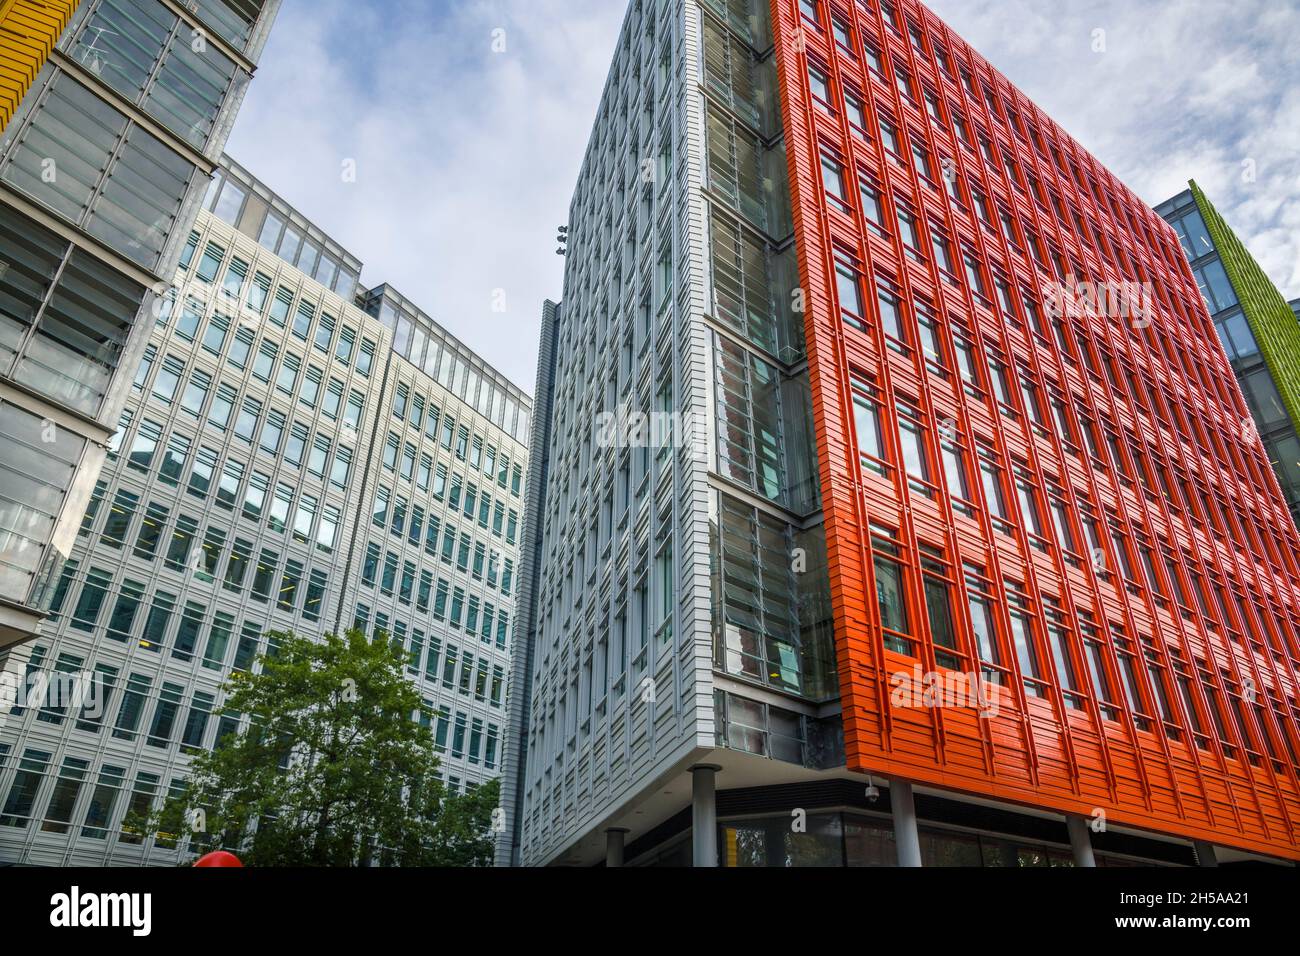 Renzo Piano Central St Giles building, modern business offices near saint giles in the fields, church, St Giles,london,england,uk Stock Photo